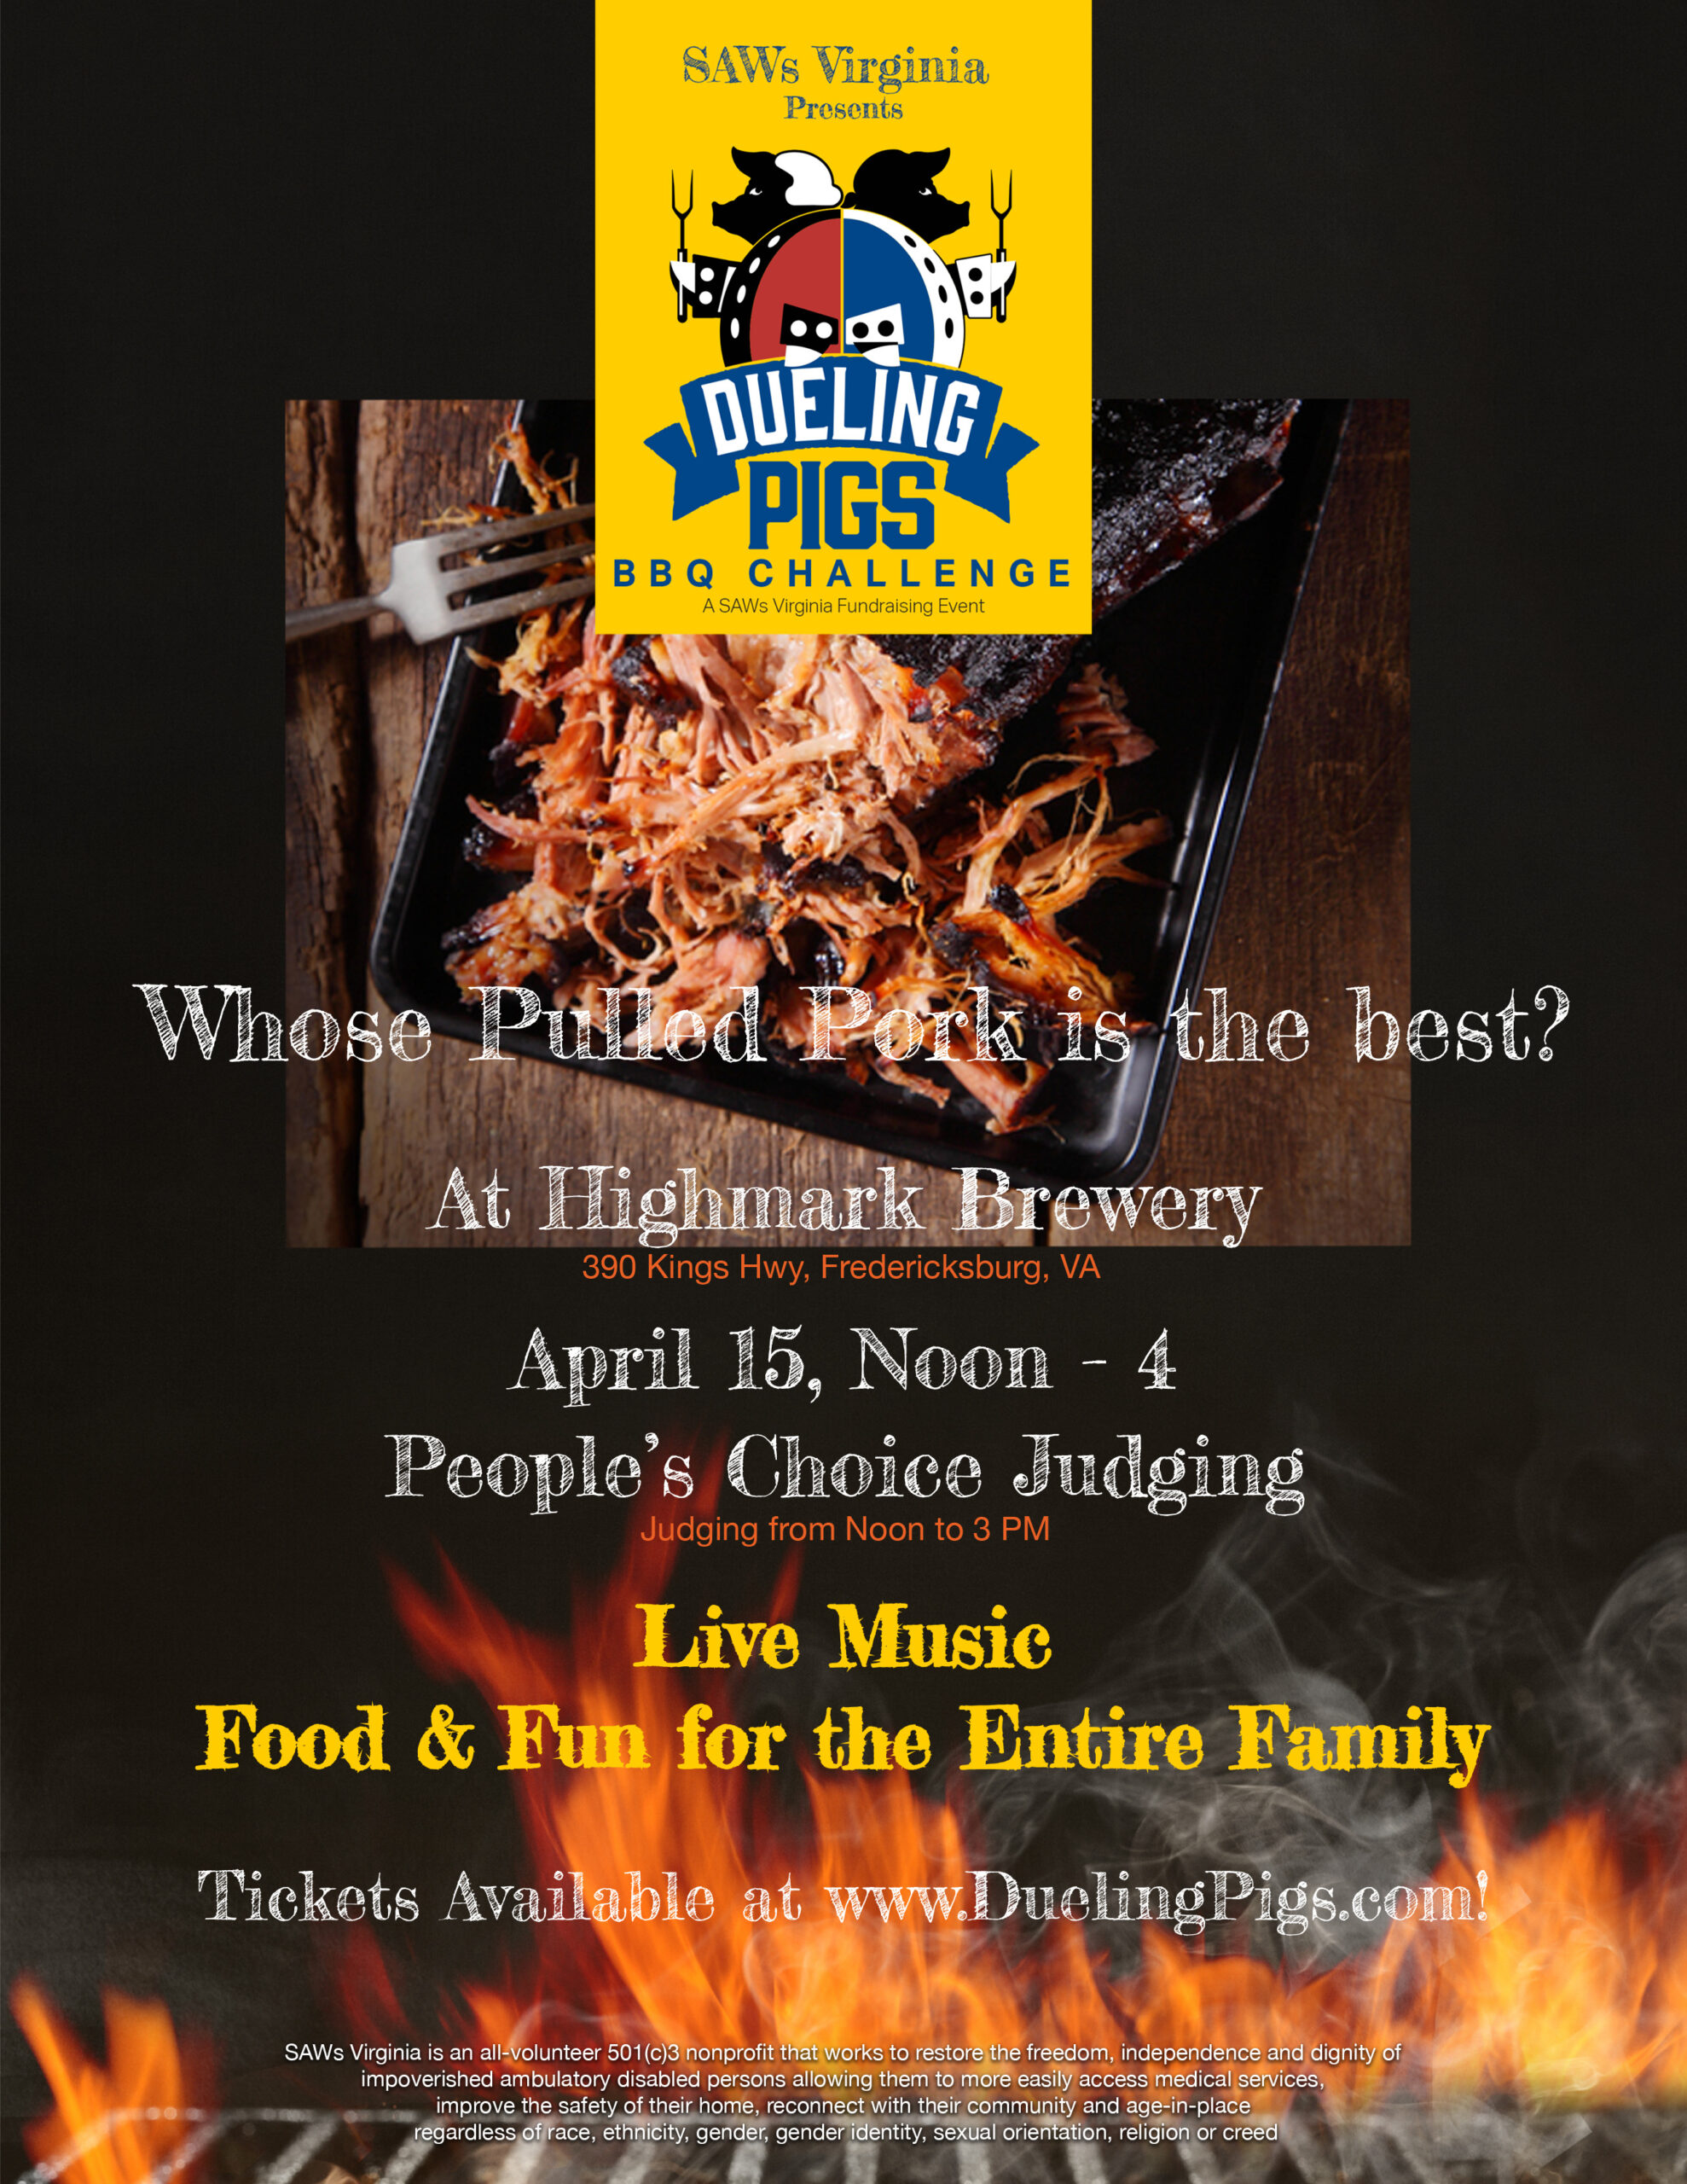 <h1 class="tribe-events-single-event-title">SAW’s Dueling Pigs BBQ Challenge</h1>